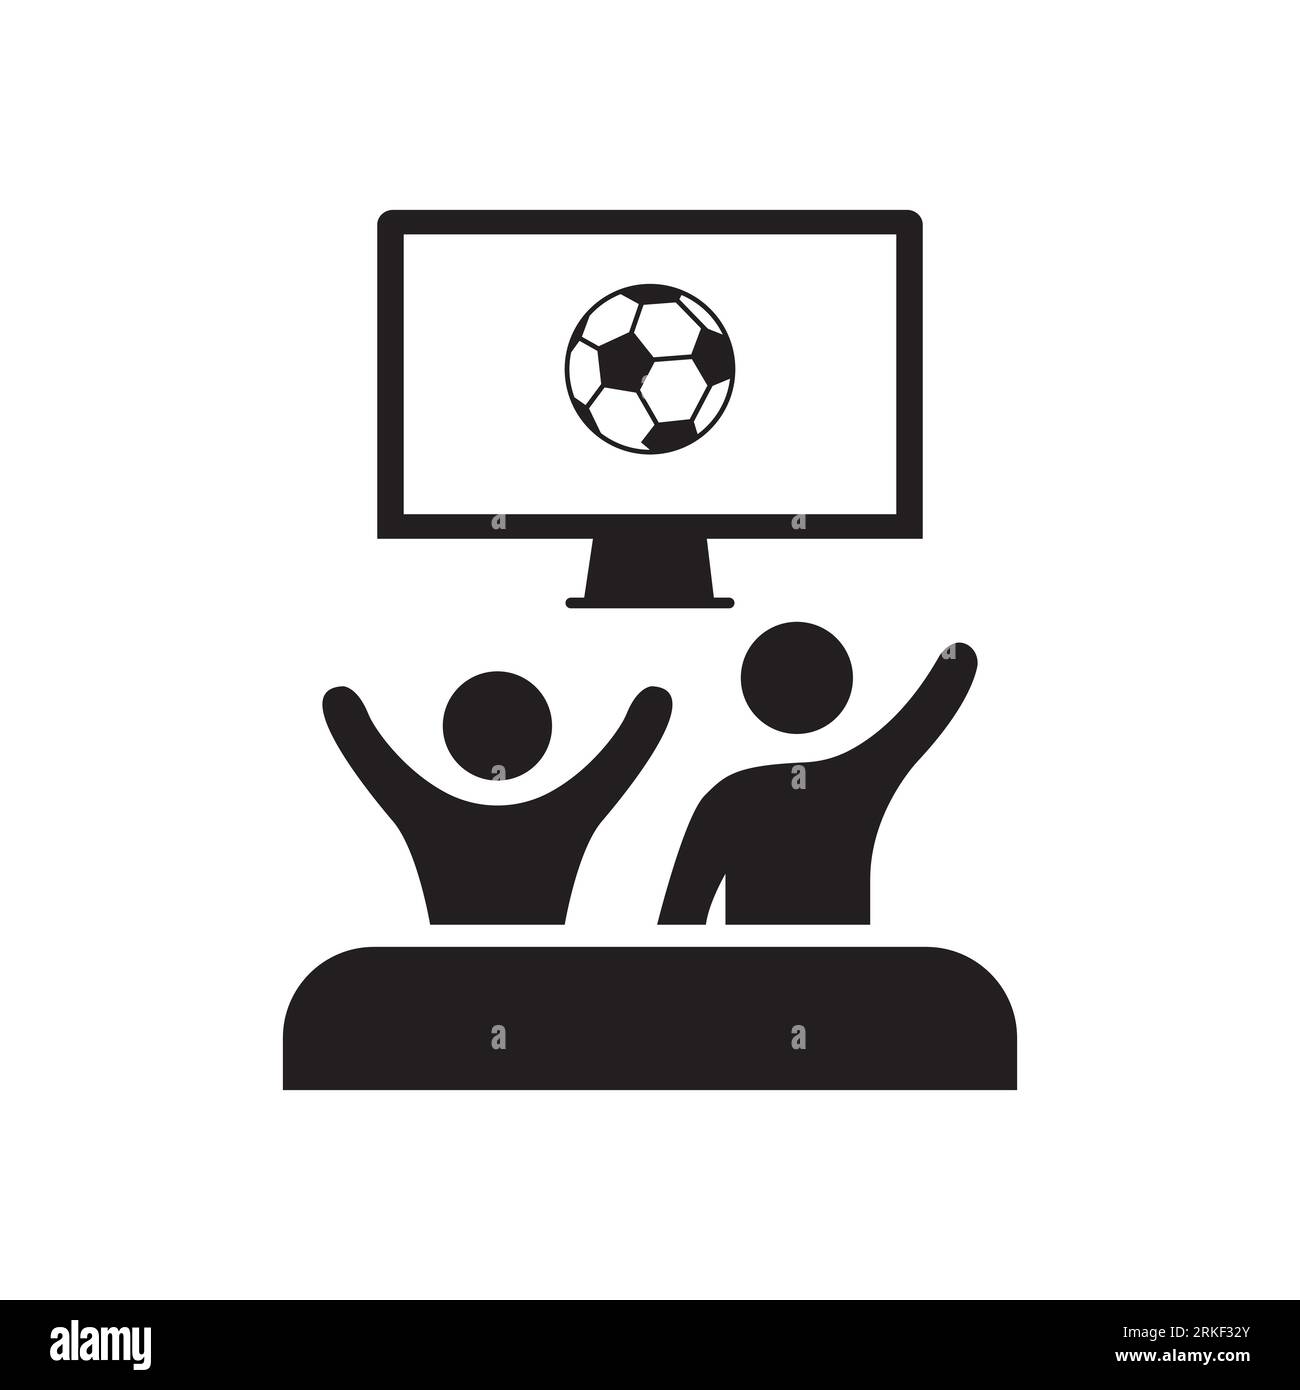 Friends watching TV, football, soccer fans icon. Vector icon isolated on white background. Stock Vector